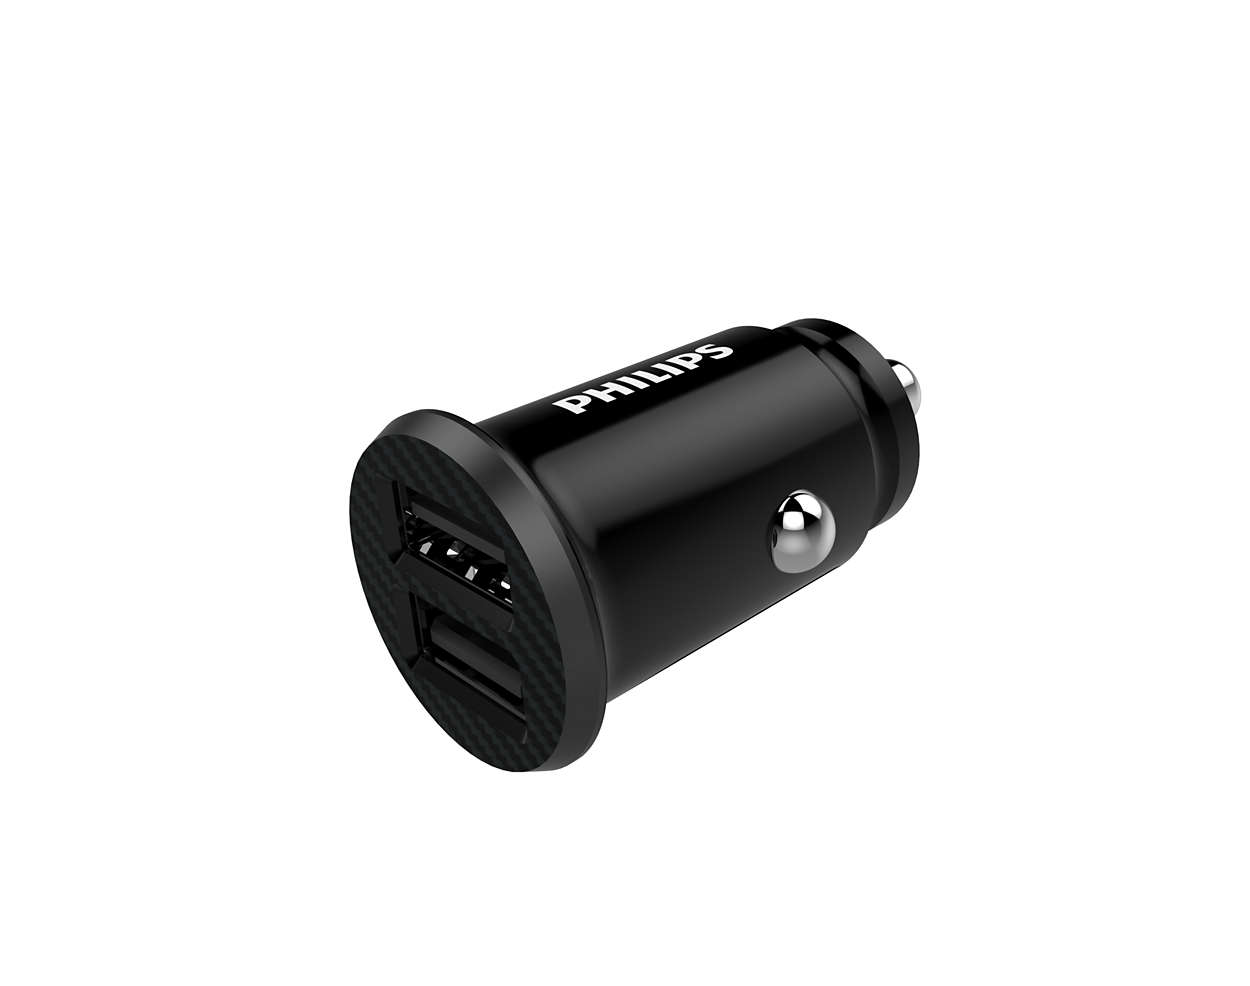 Car charger with 2 USB ports